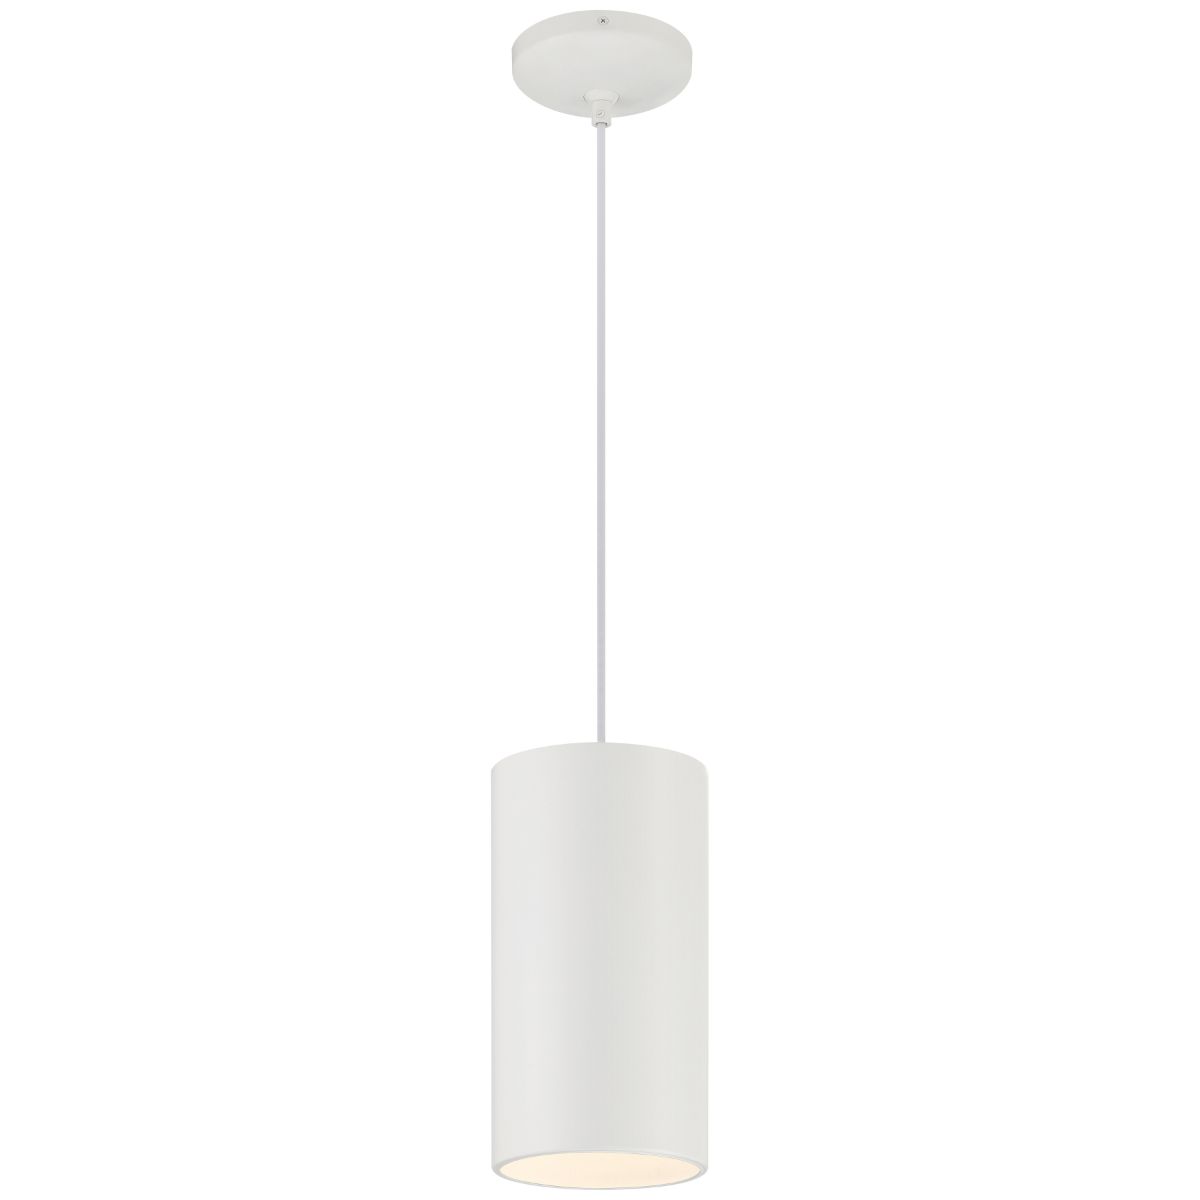 Pilson XL 11 in. Pendant Light with Cord